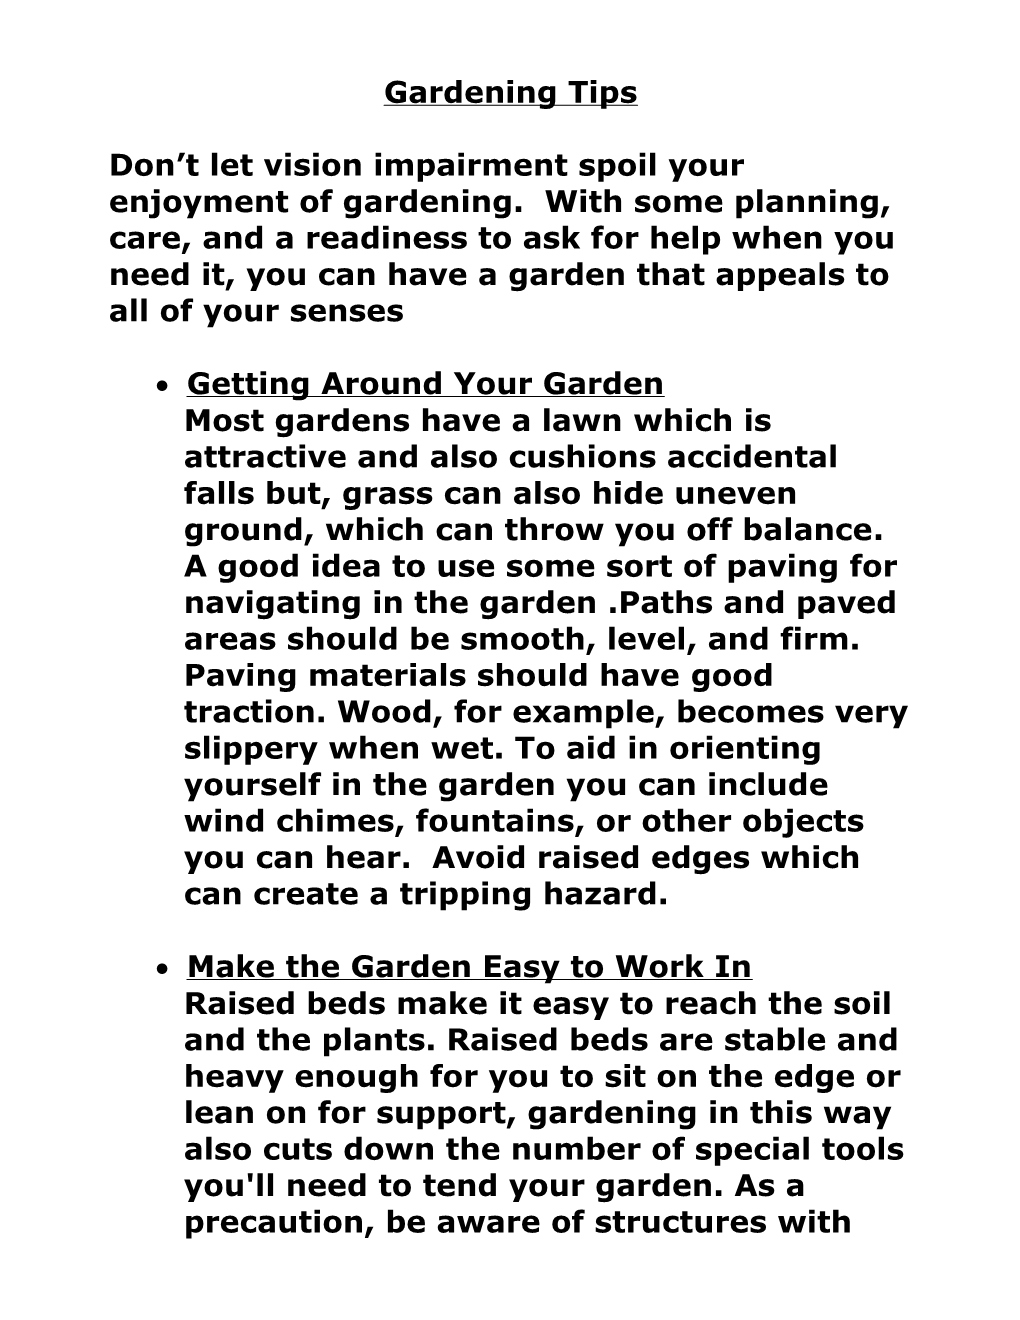 Don T Let Vision Impairment Spoil Your Enjoyment of Gardening. with Some Planning, Care